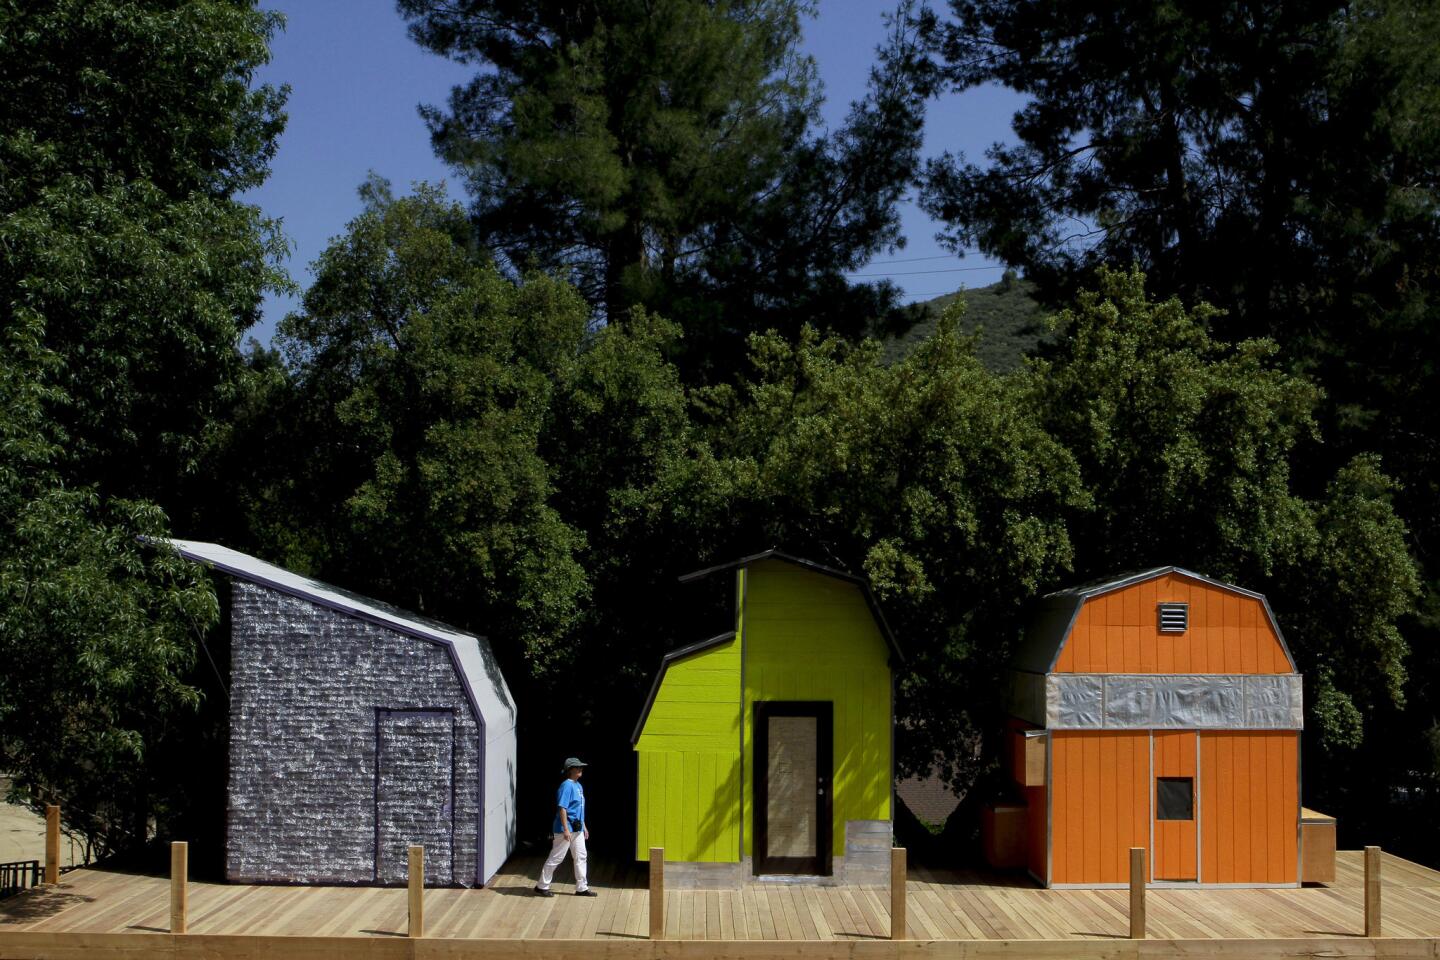 By Lisa Boone Woodbury architecture students transformed 10-by-10-foot sheds into clever and colorful accommodations set up at the Shadow Hills Riding Club equestrian center. The sheds had to be tweaked to provide light, ventilation, insulation and sleeping space for two. And though the teams each had a budget of $1,500 for additional supplies, they also had a mandate to experiment with one assigned material. Pictured here are the cabins from the plastic team, left, the wood team and the paper team.